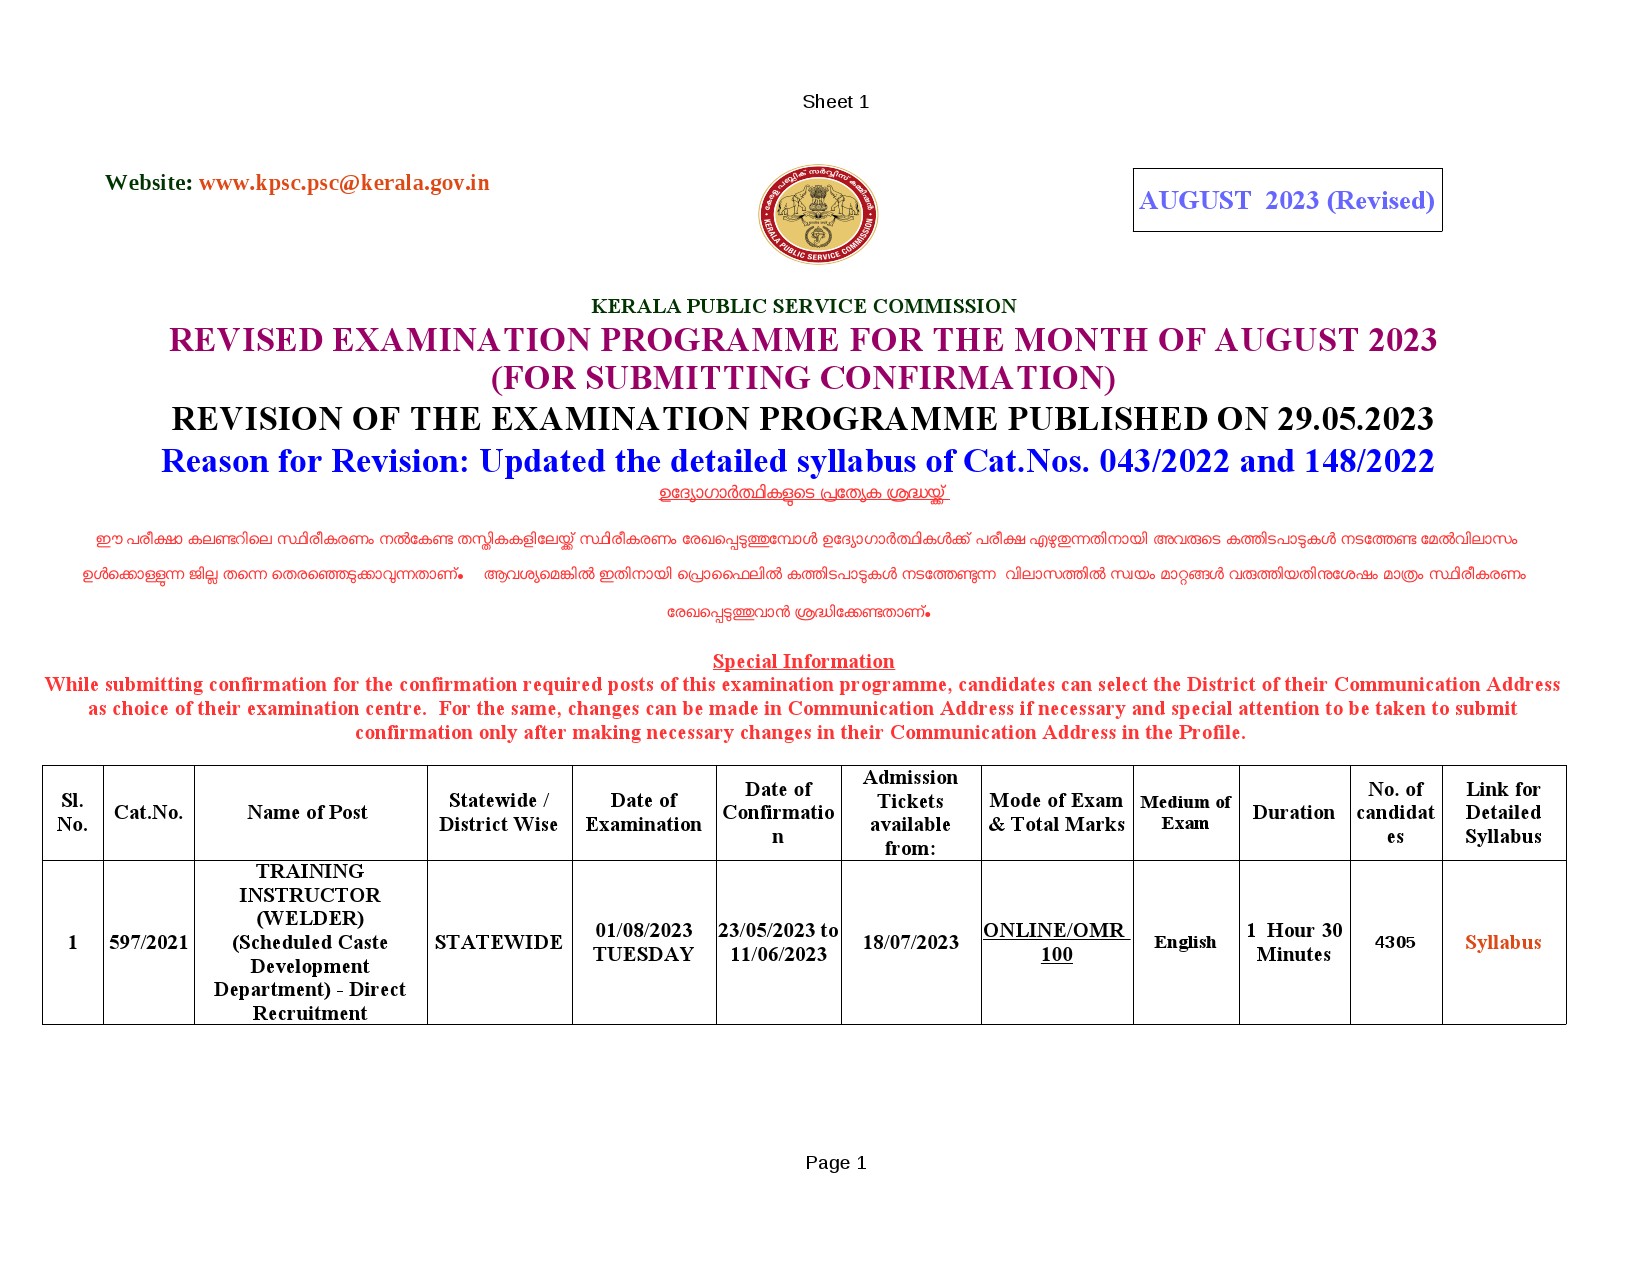 REVISED EXAMINATION PROGRAMME FOR THE MONTH OF AUGUST 2023 - Notification Image 1